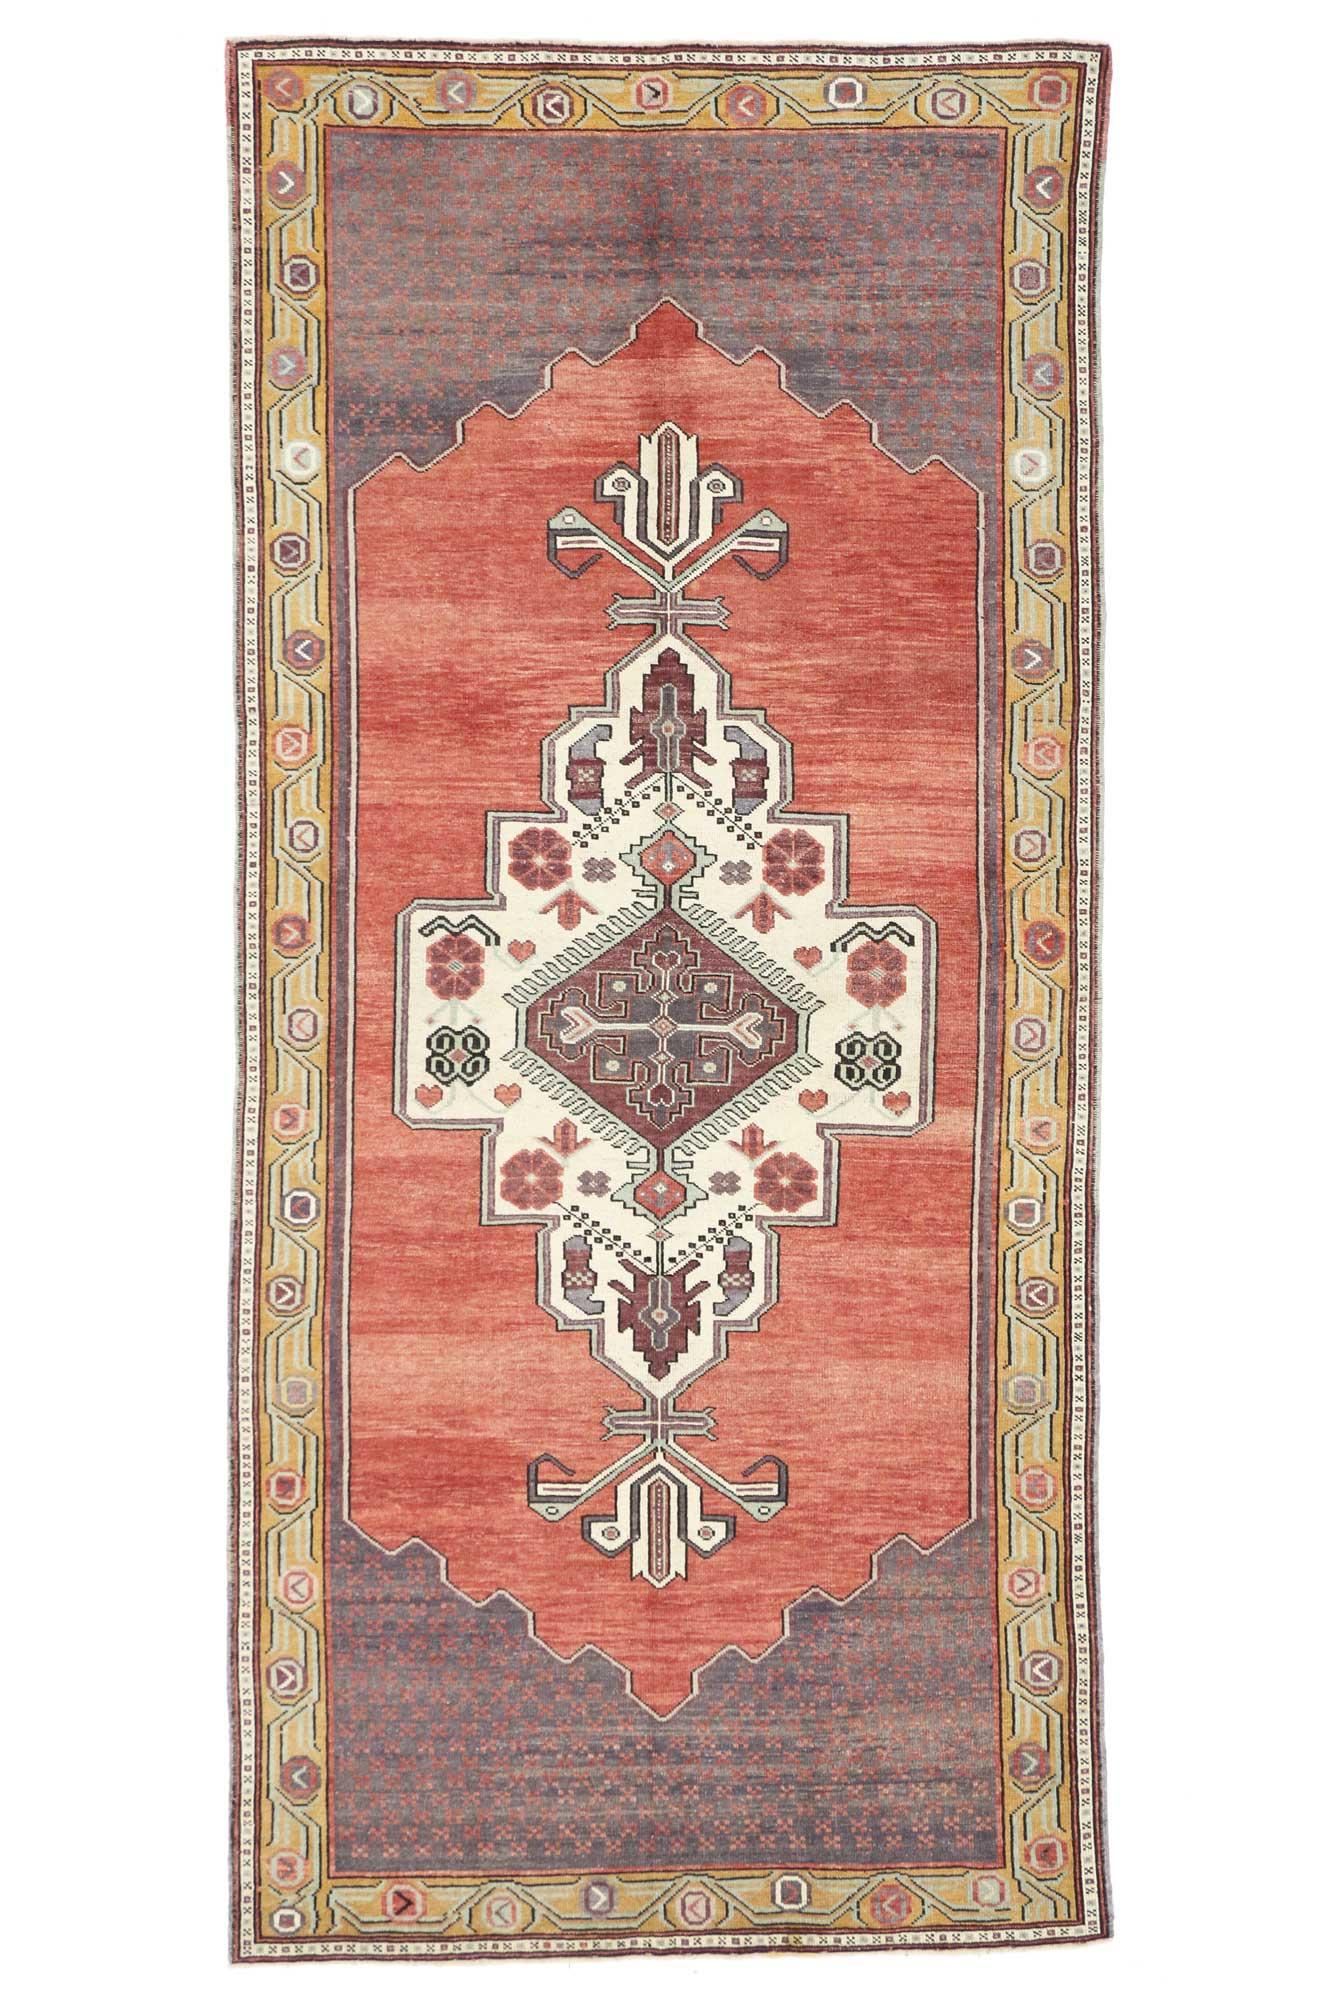 51363 Vintage Turkish Oushak rug, 05'02 x 11'04.
This hand knotted wool vintage Oushak gallery rug features an elaborate Turkish design and rich waves of abrash rendered in soft, neutral colors. With its compelling center medallion and stylized